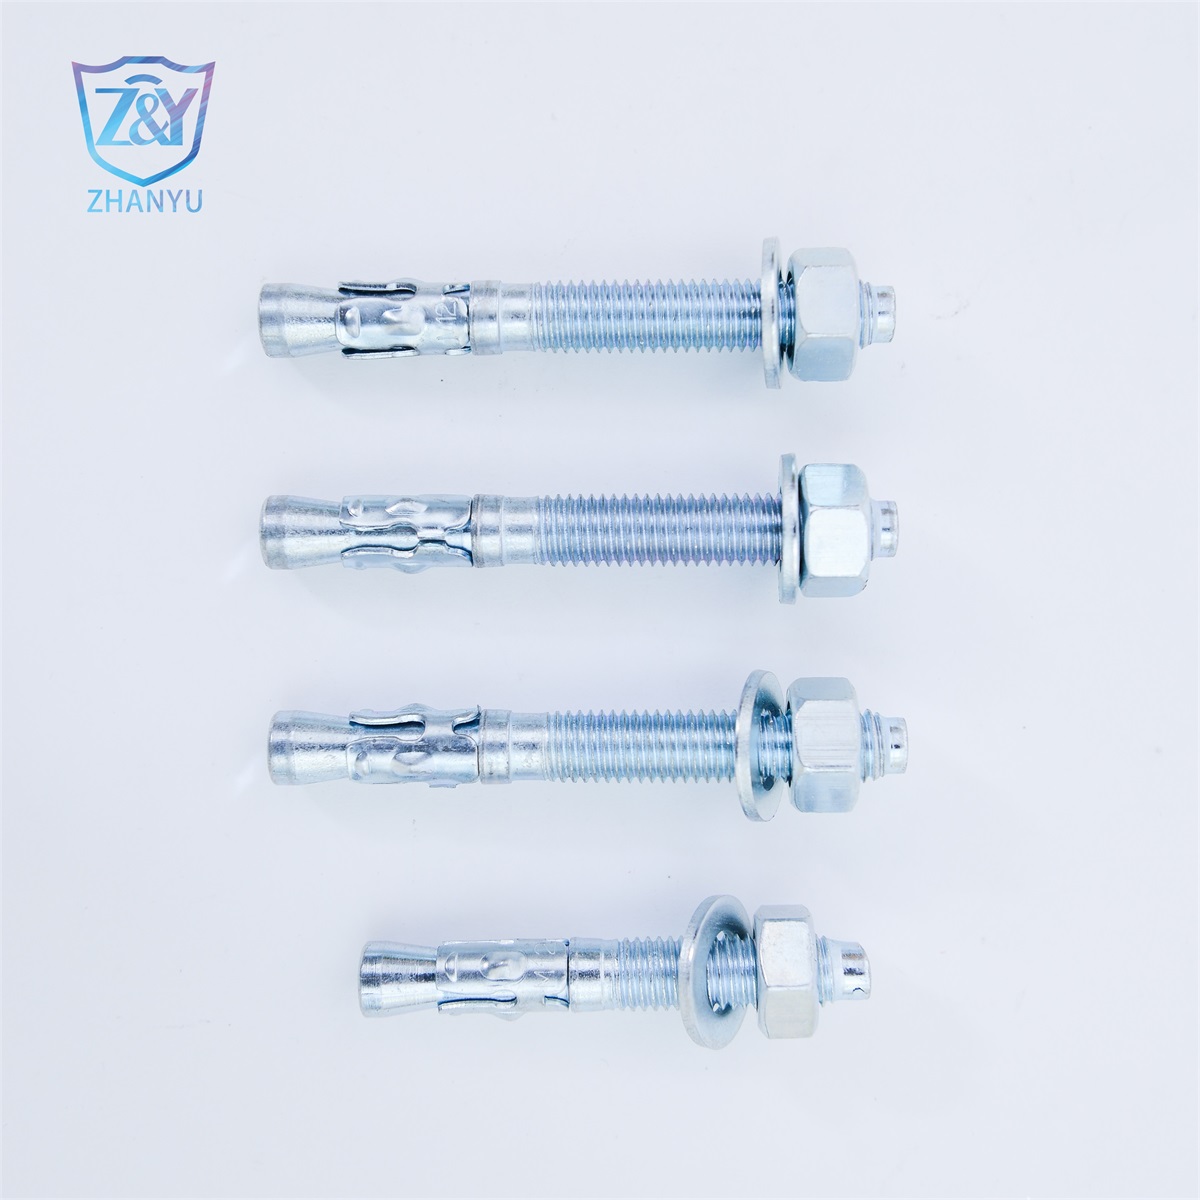 China wholesale Carbon Steel Galvanized Wedge Anchor Pricelist –  wedge anchor GB /T 22795 Expansion Screw Through Bolt and Nuts Hex Concrete Wall Hardware Wedge Anchors Bolt – Zhanyu